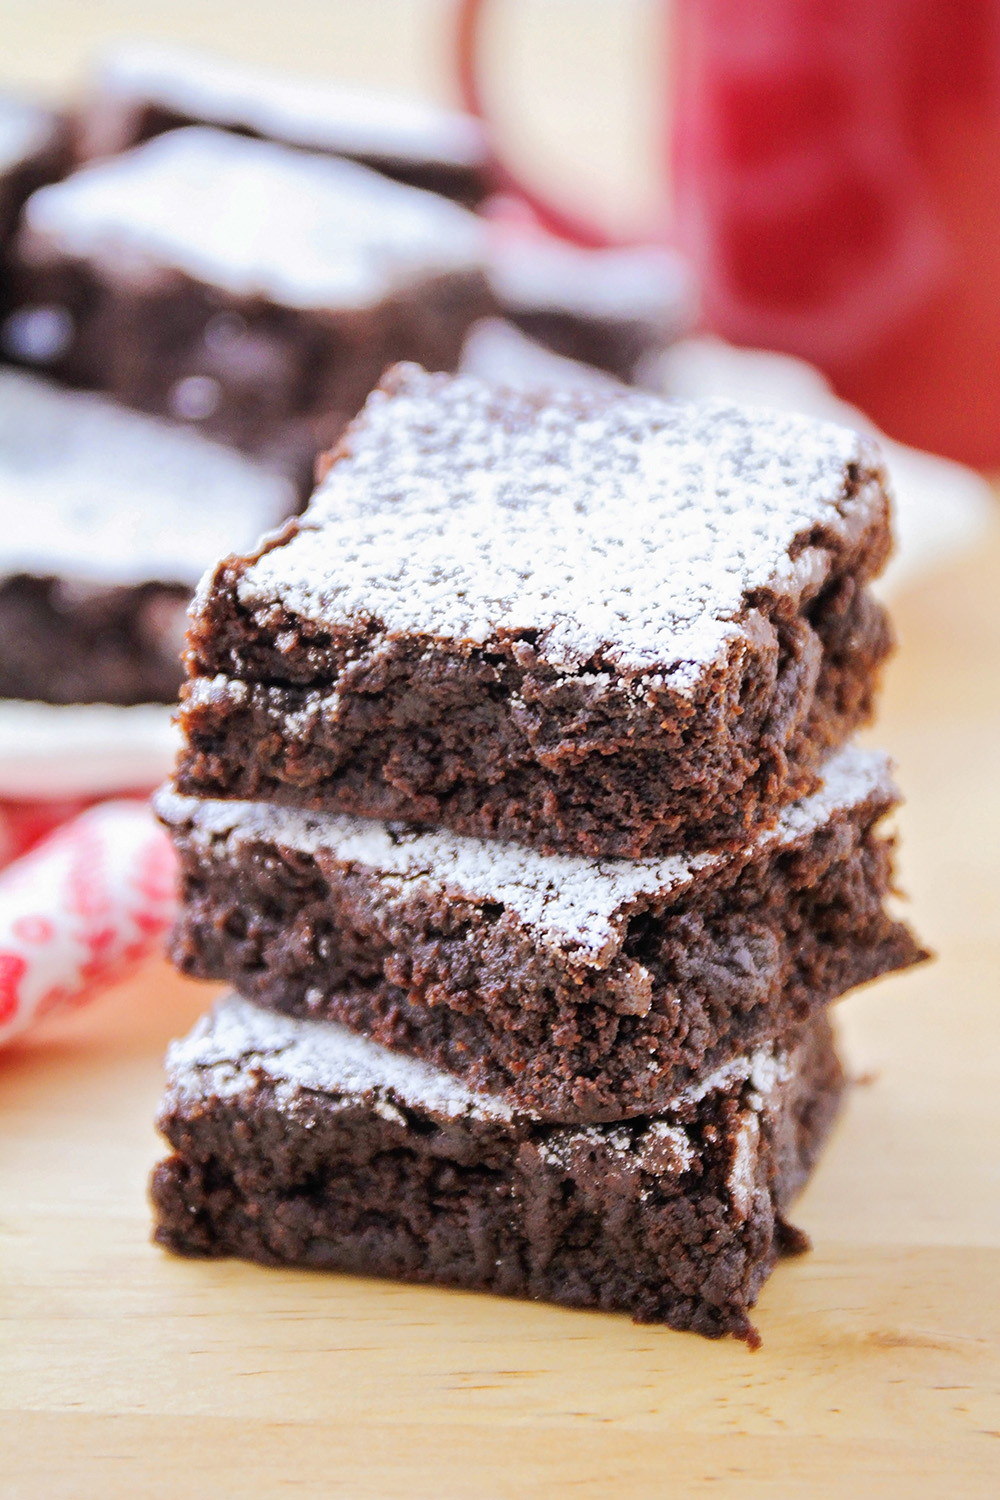 These fudgy chocolate gingerbread brownies are so delicious! The combination of dark chocolate with a hint of spice makes these brownies unforgettable!